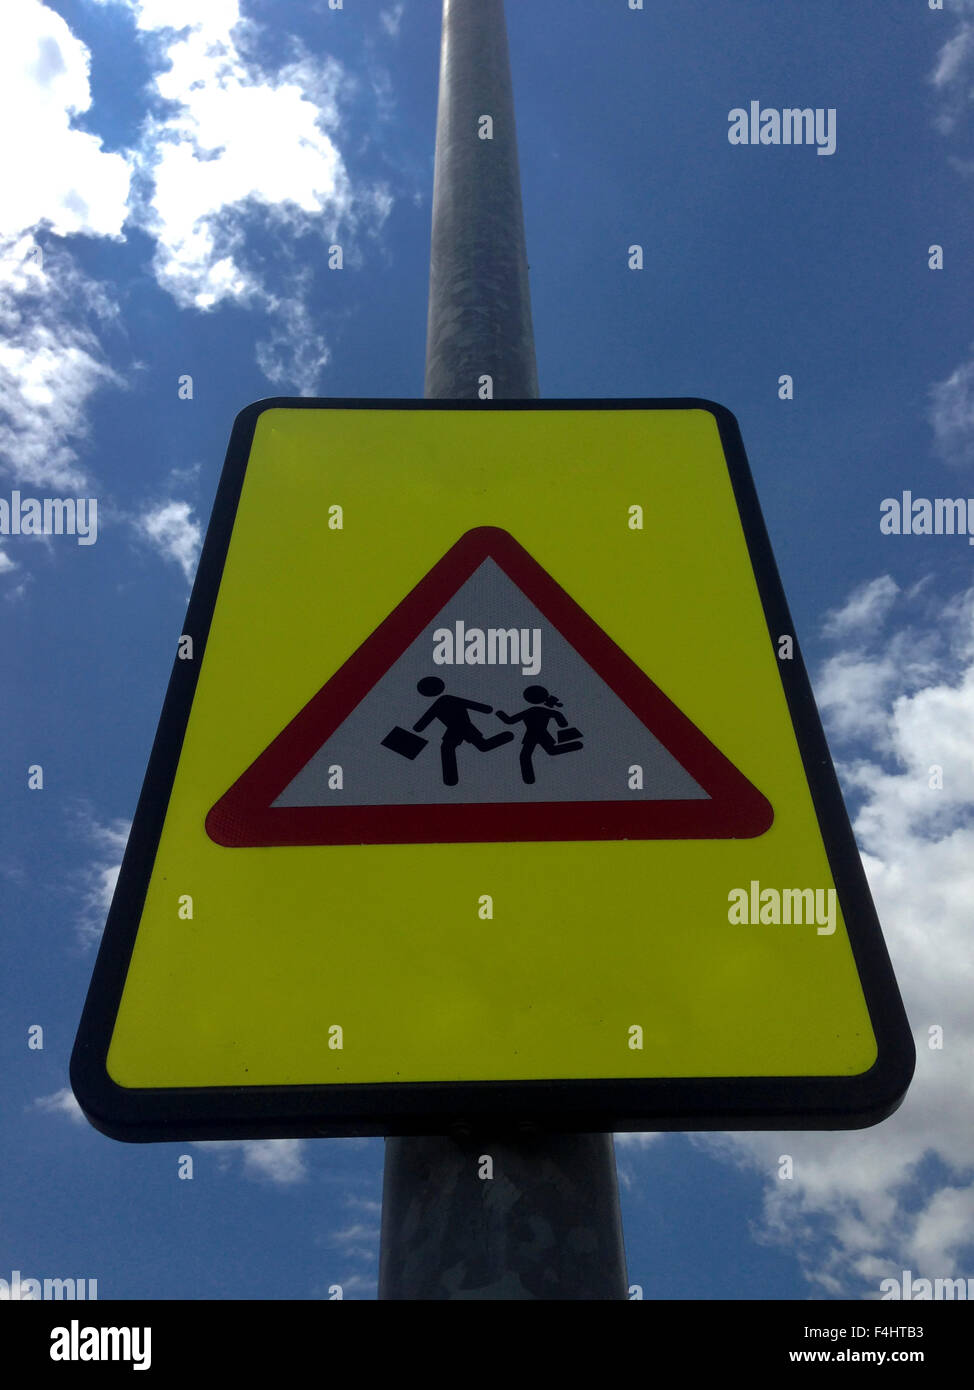 warning school zone traffic sign pole over blue sky Stock Photo